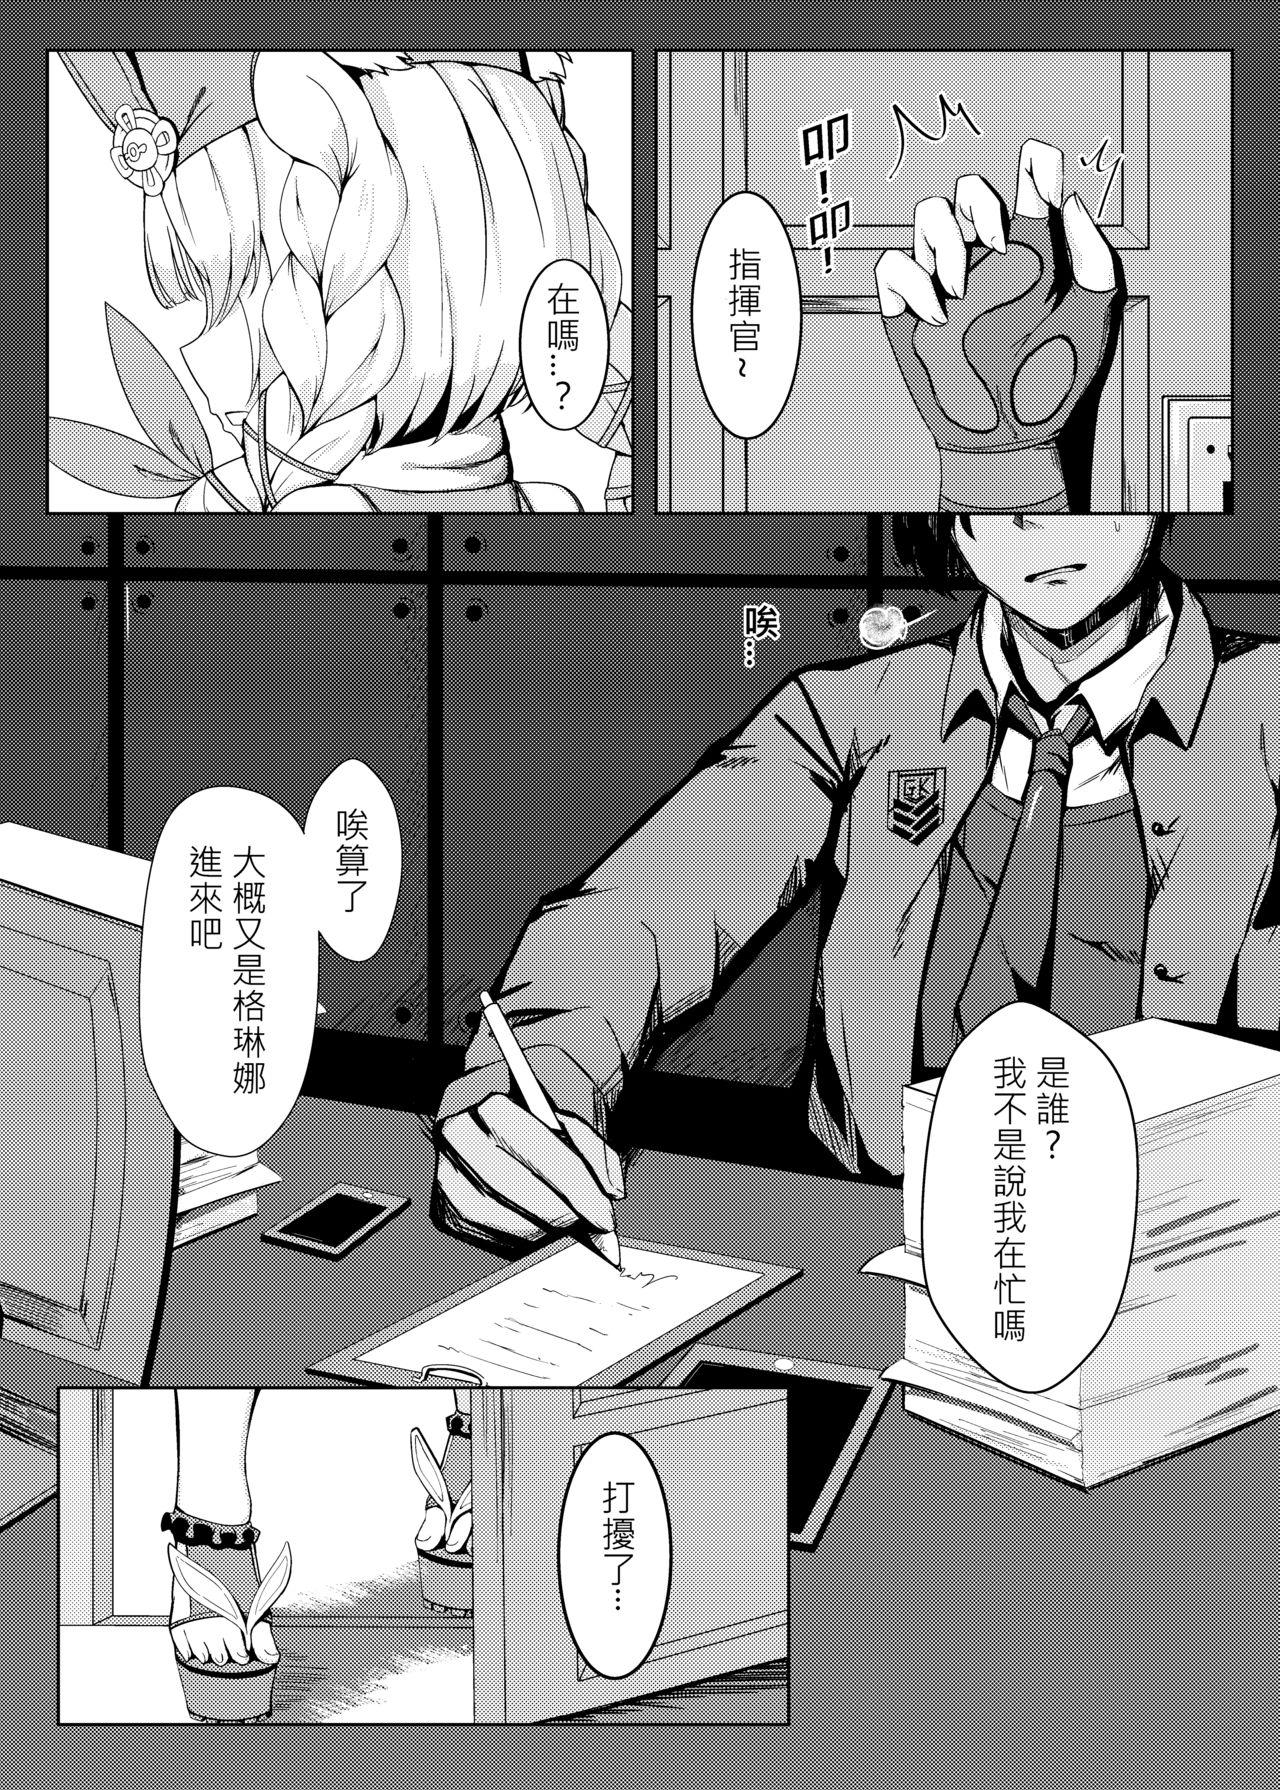 Gay Averagedick Rest with SR-3MP - Girls frontline Gay Largedick - Page 3